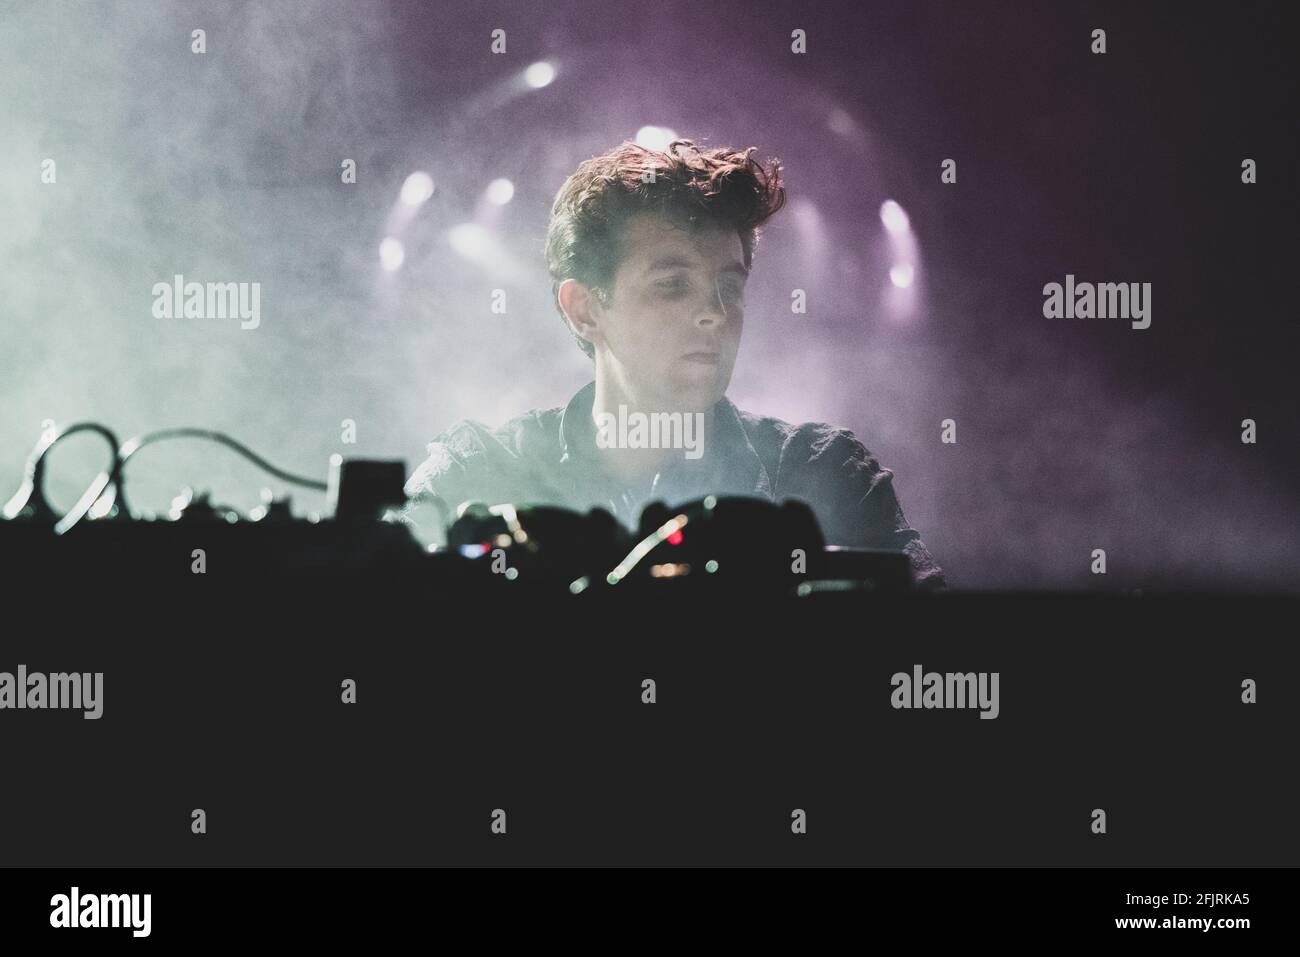 LINGOTTO FIERE, TORINO, ITALY: The English musician, DJ, record producer and remixer Jamie XX performing live on stage at the Club To Club festival in Torino. Stock Photo